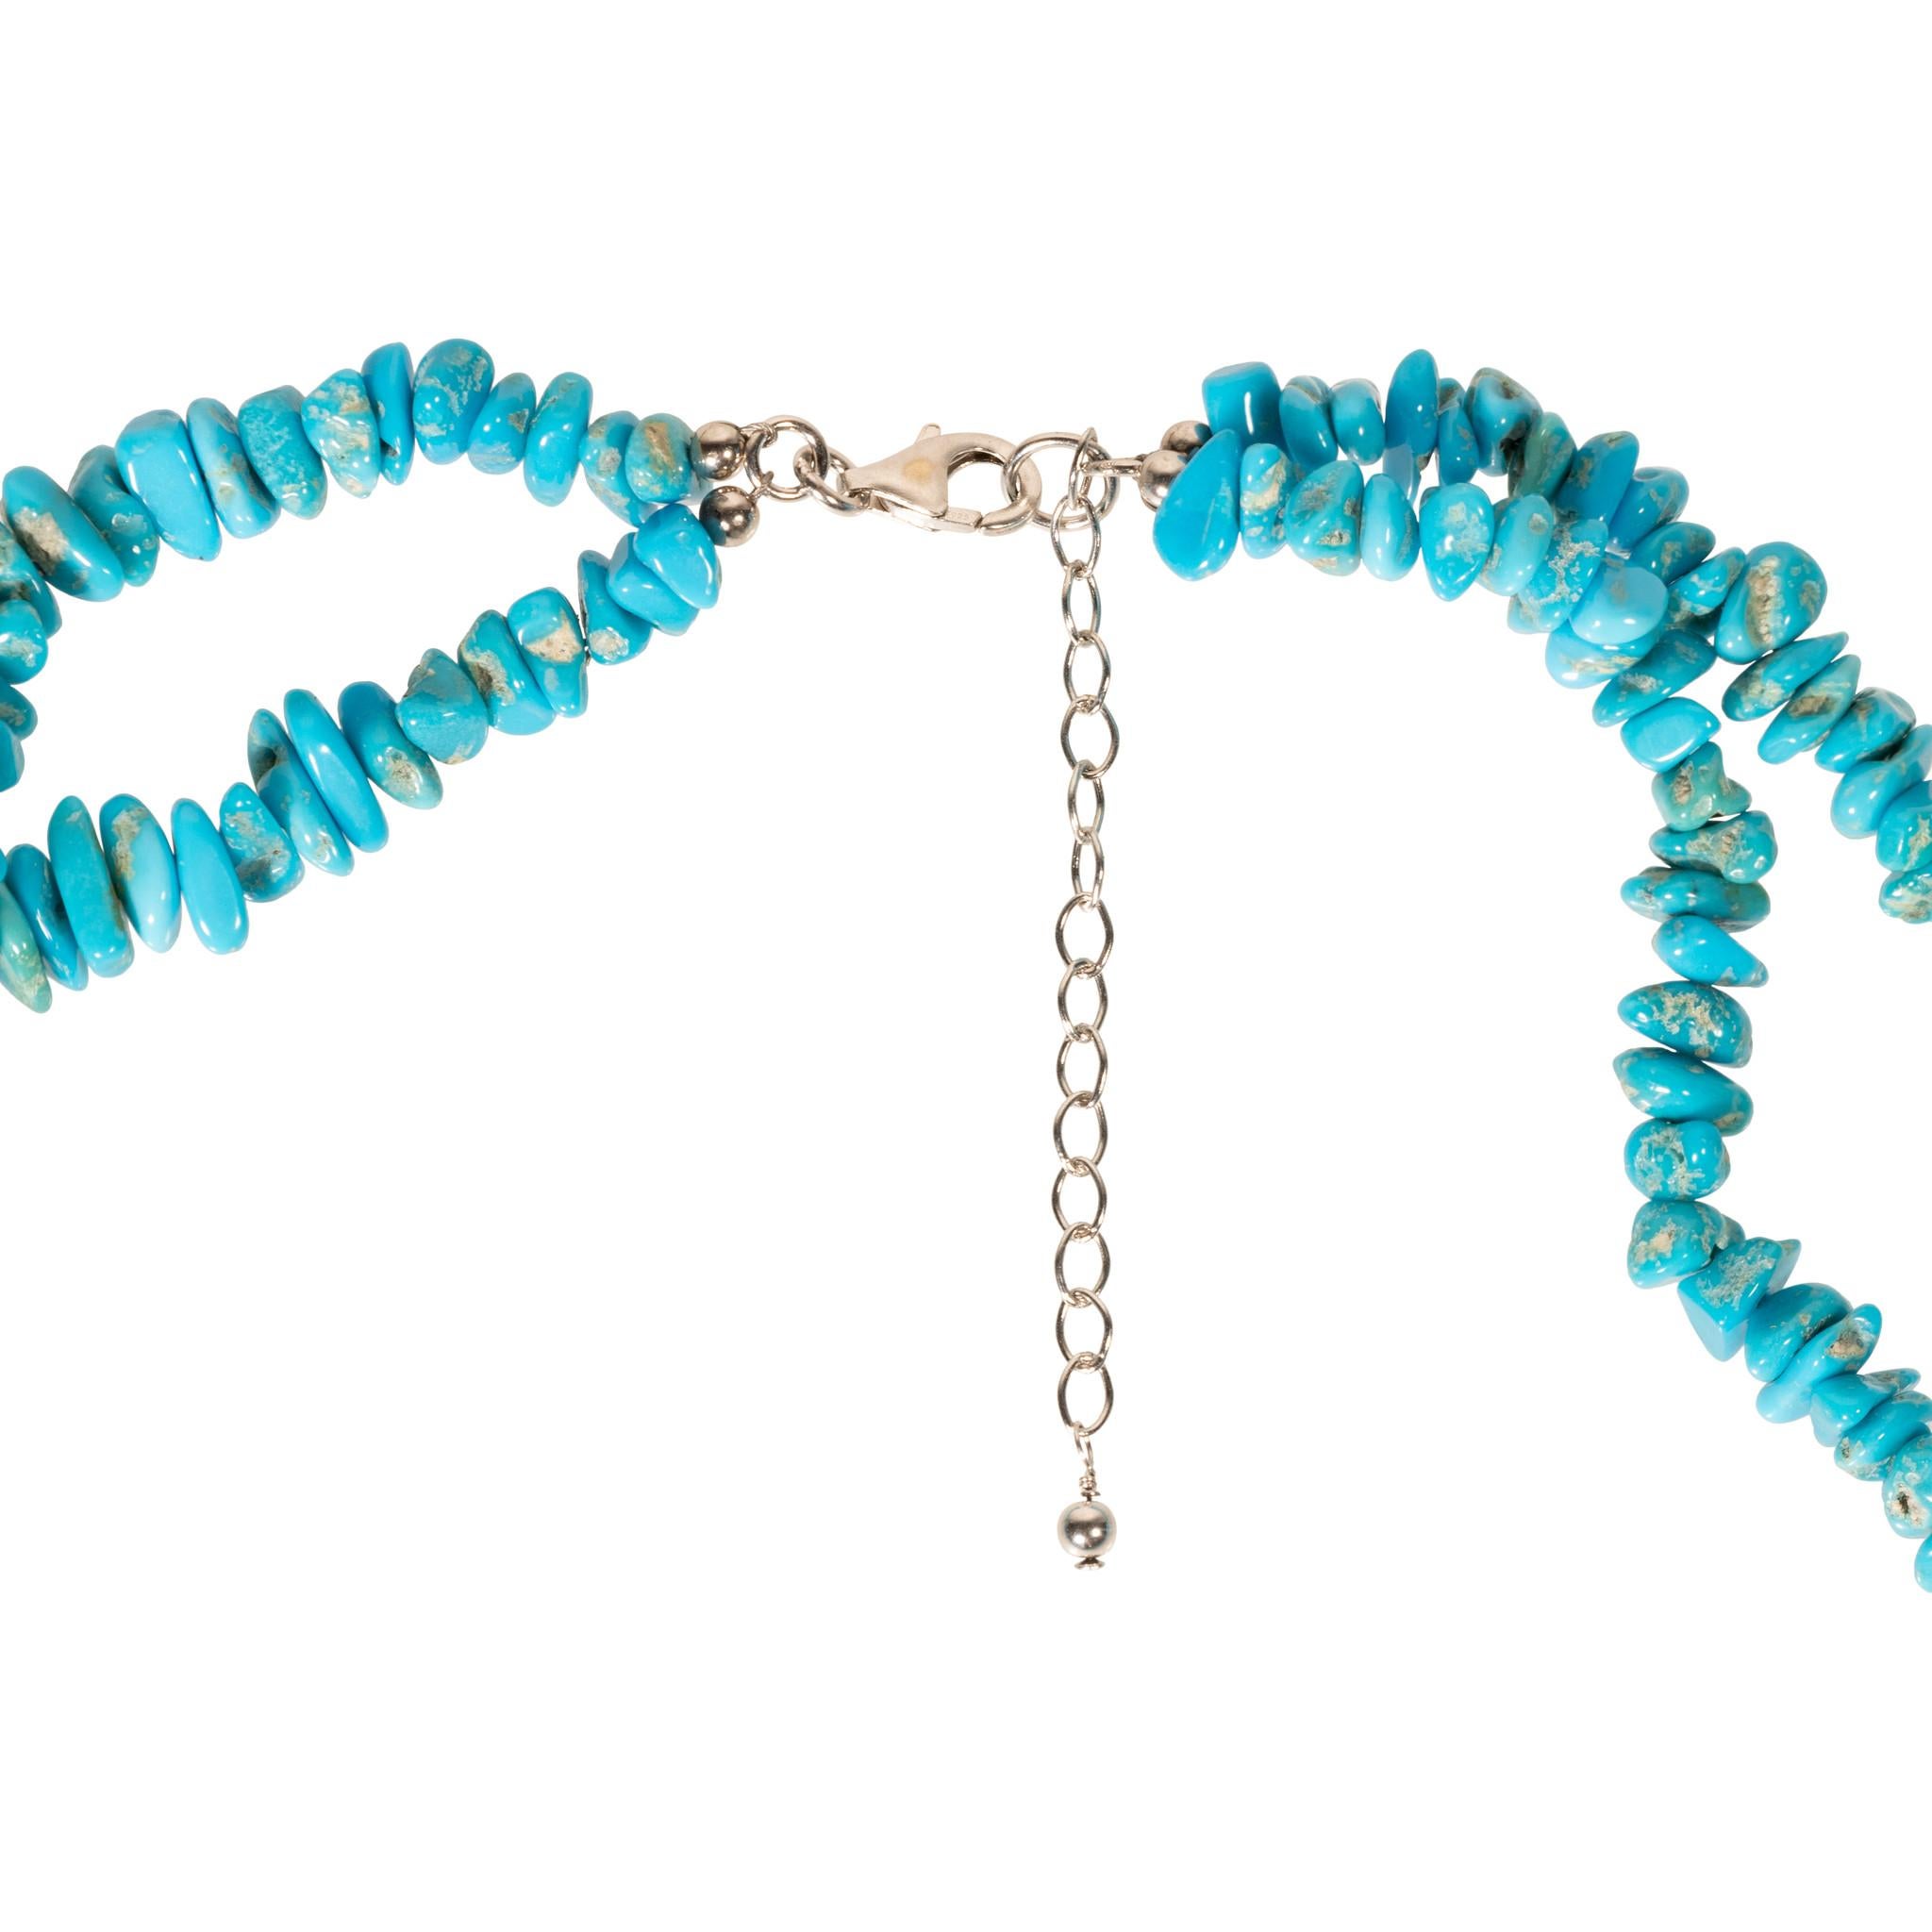 Multi strand beaded turquoise necklace with traditional sterling silver twisted clasps with long extender. Navajo made. Ten layered strands with genuine discs of light, bright blue turquoise with minimal to no matrix. Beads are small and finely